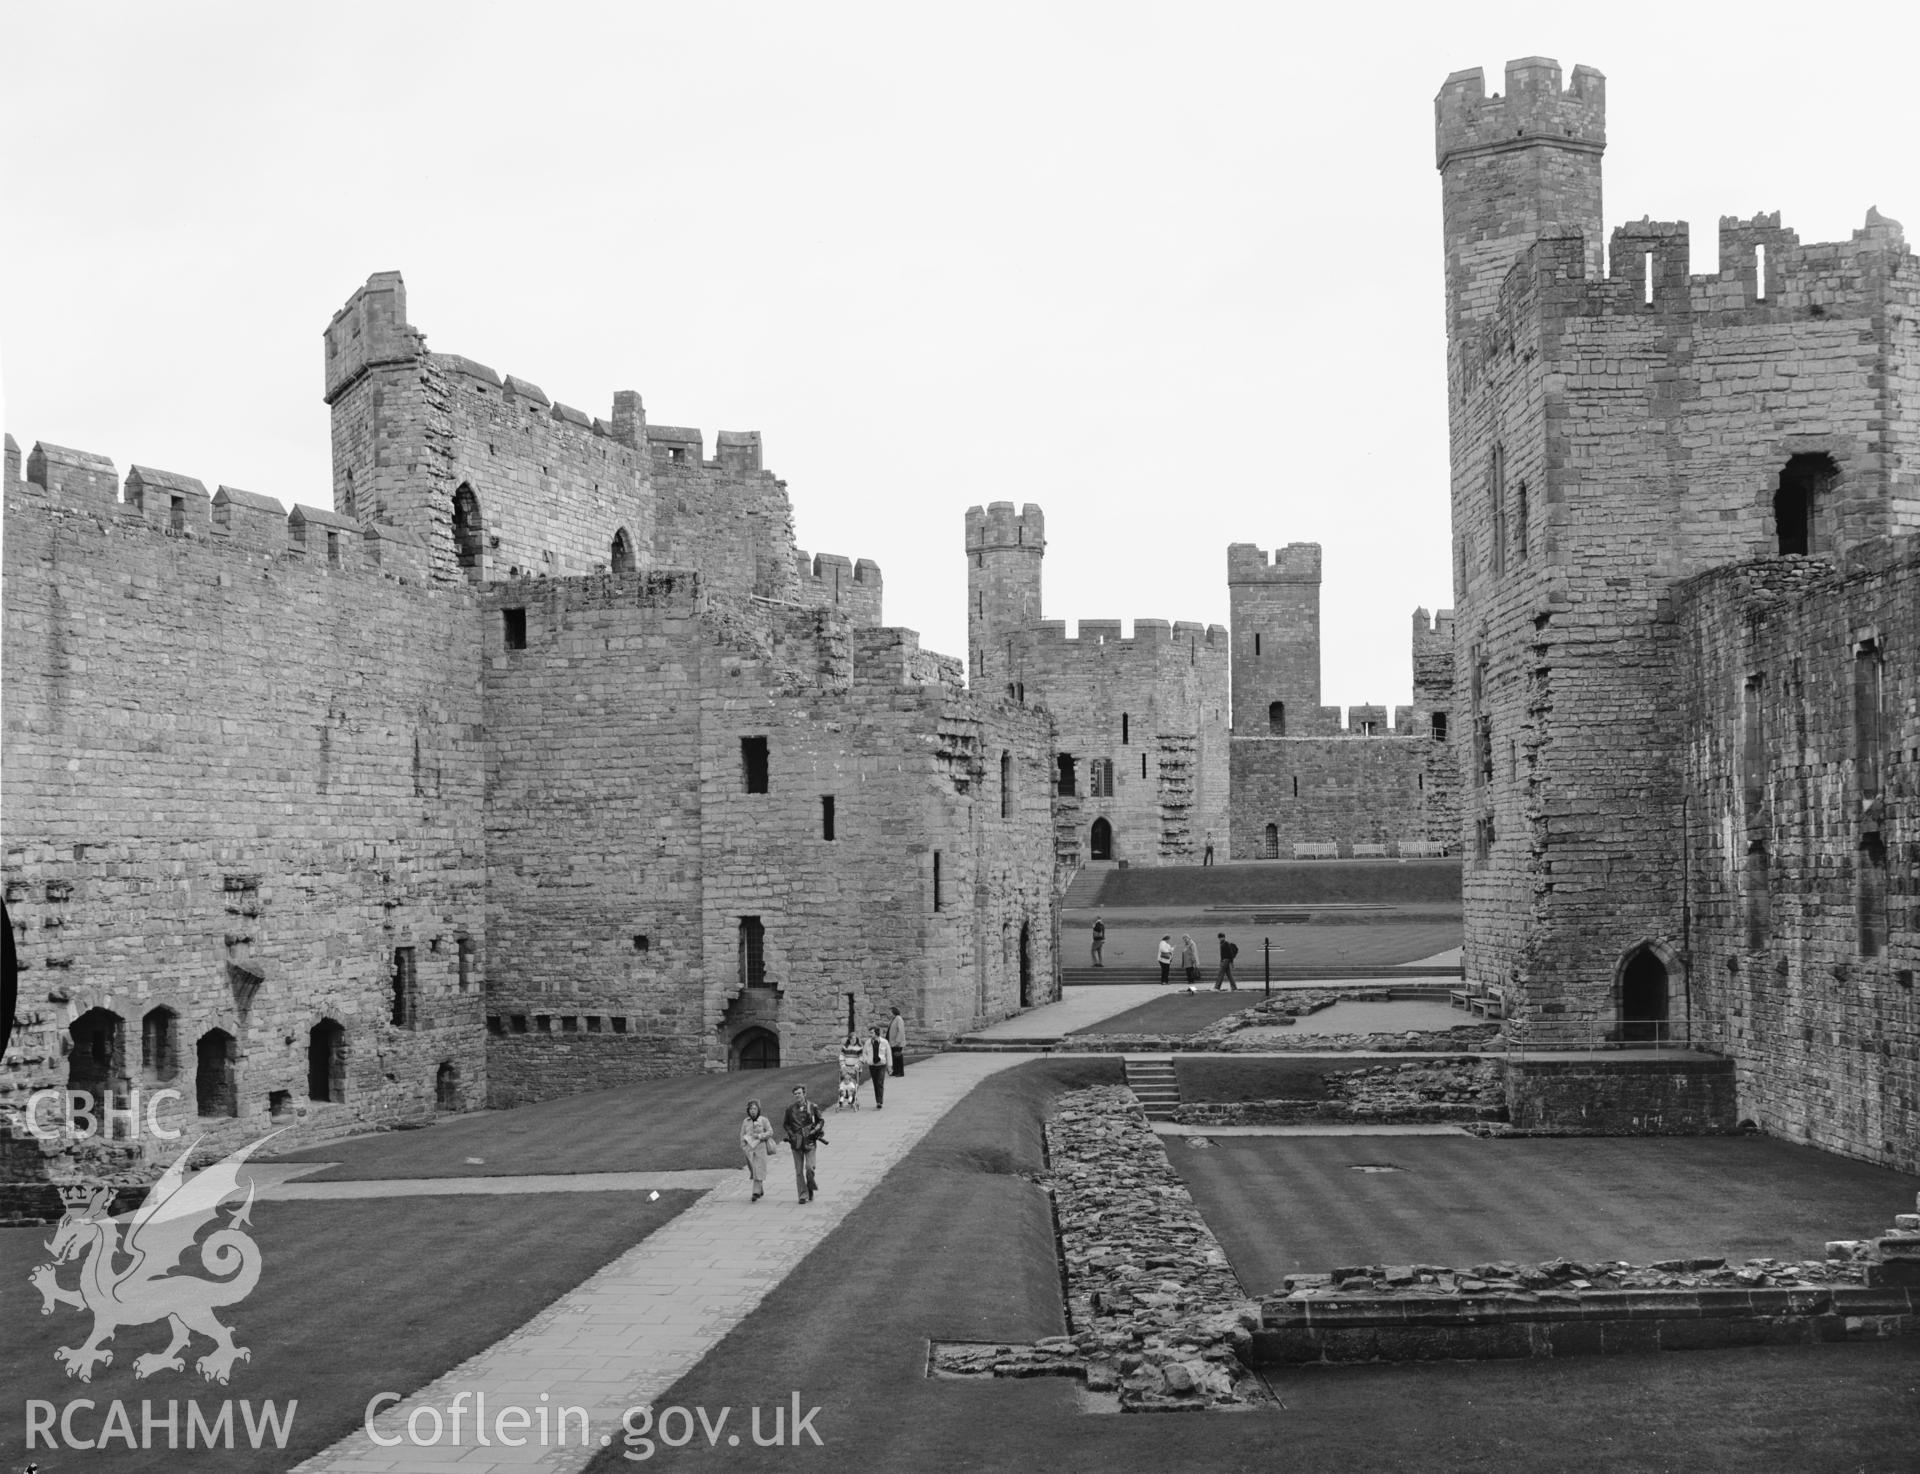 1 b/w print showing aspect of Caernarfon castle, collated by the former Central Office of Information.